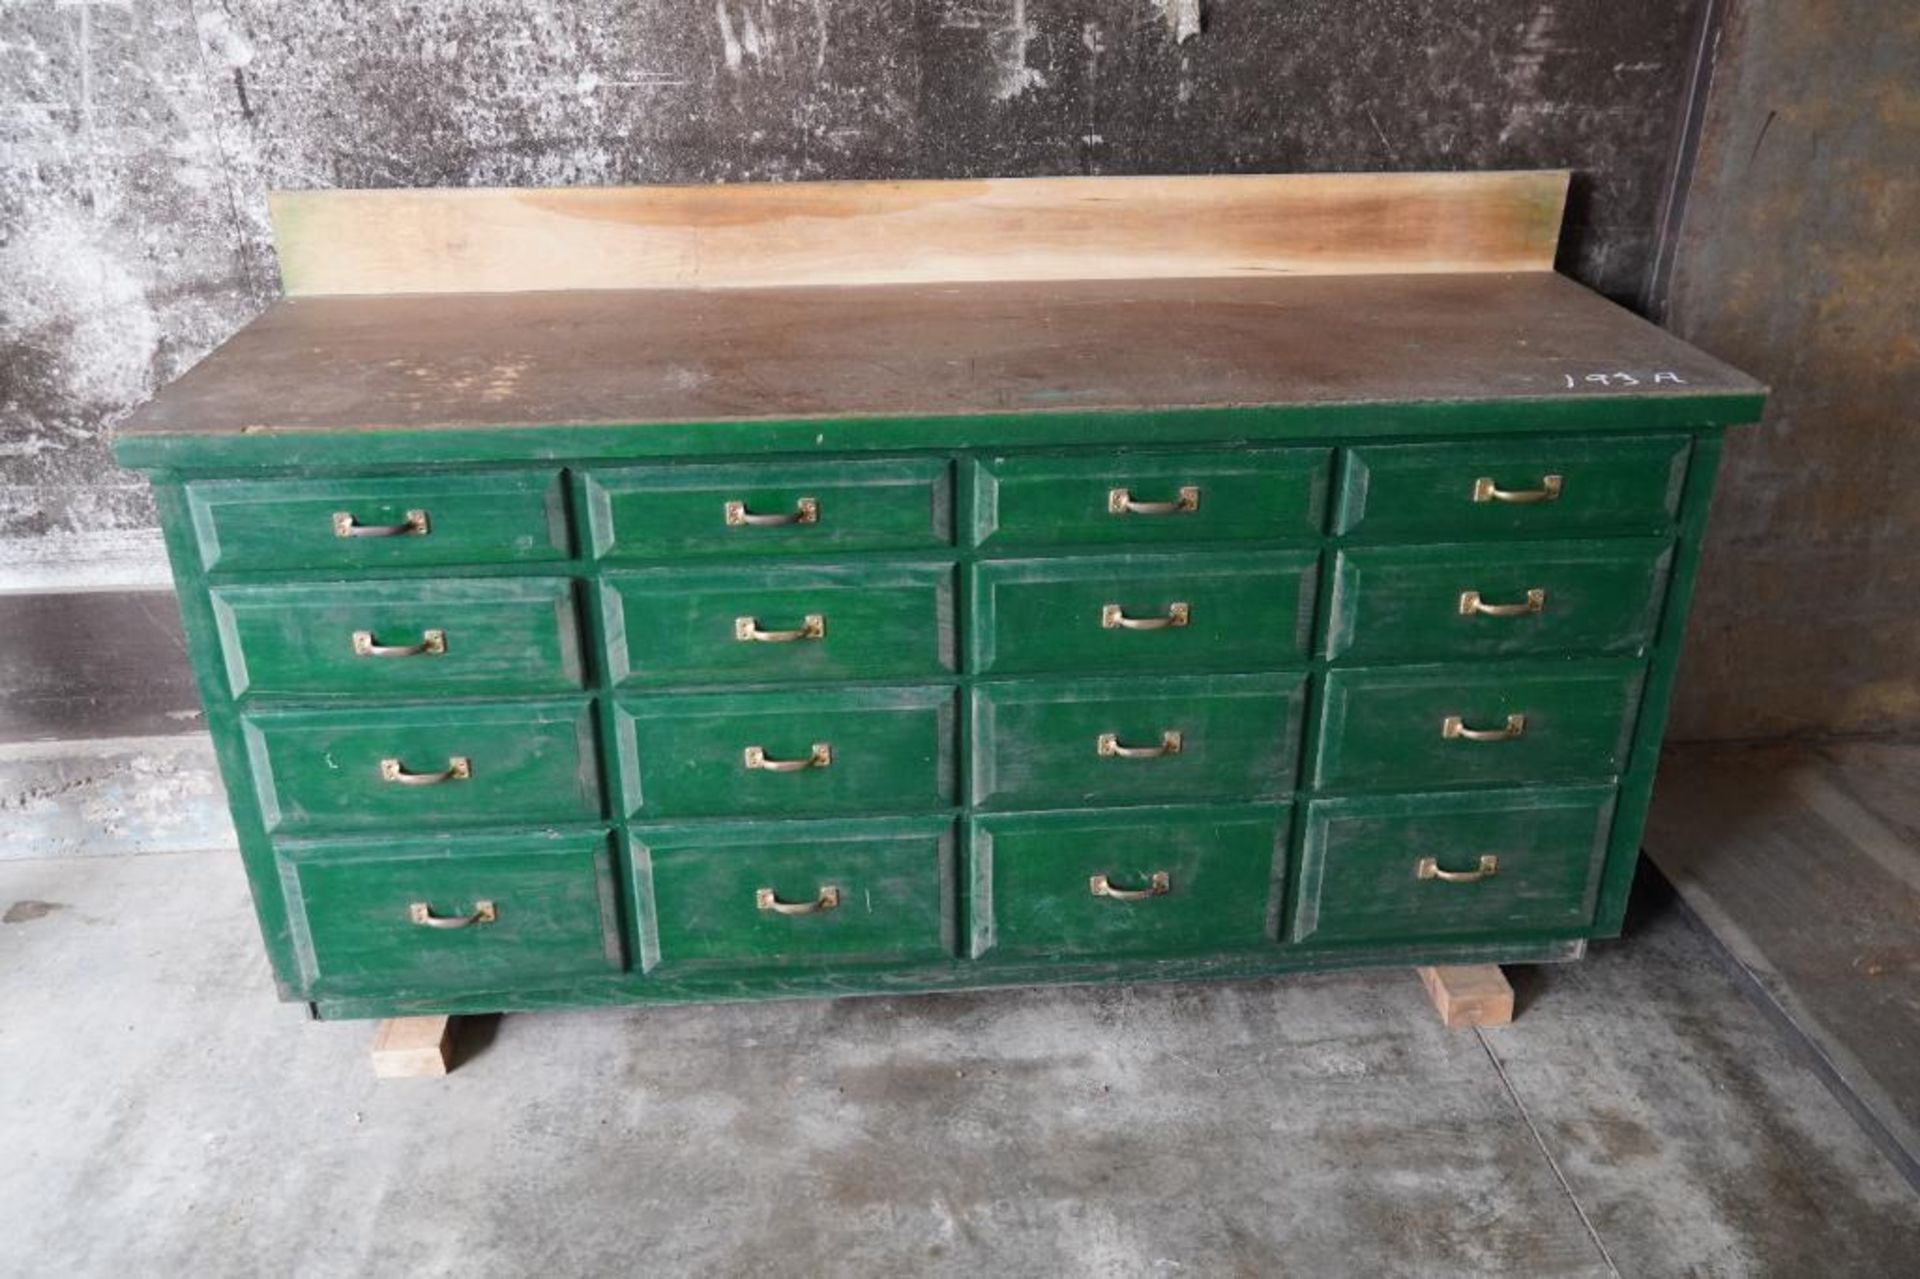 Work Bench with drawers